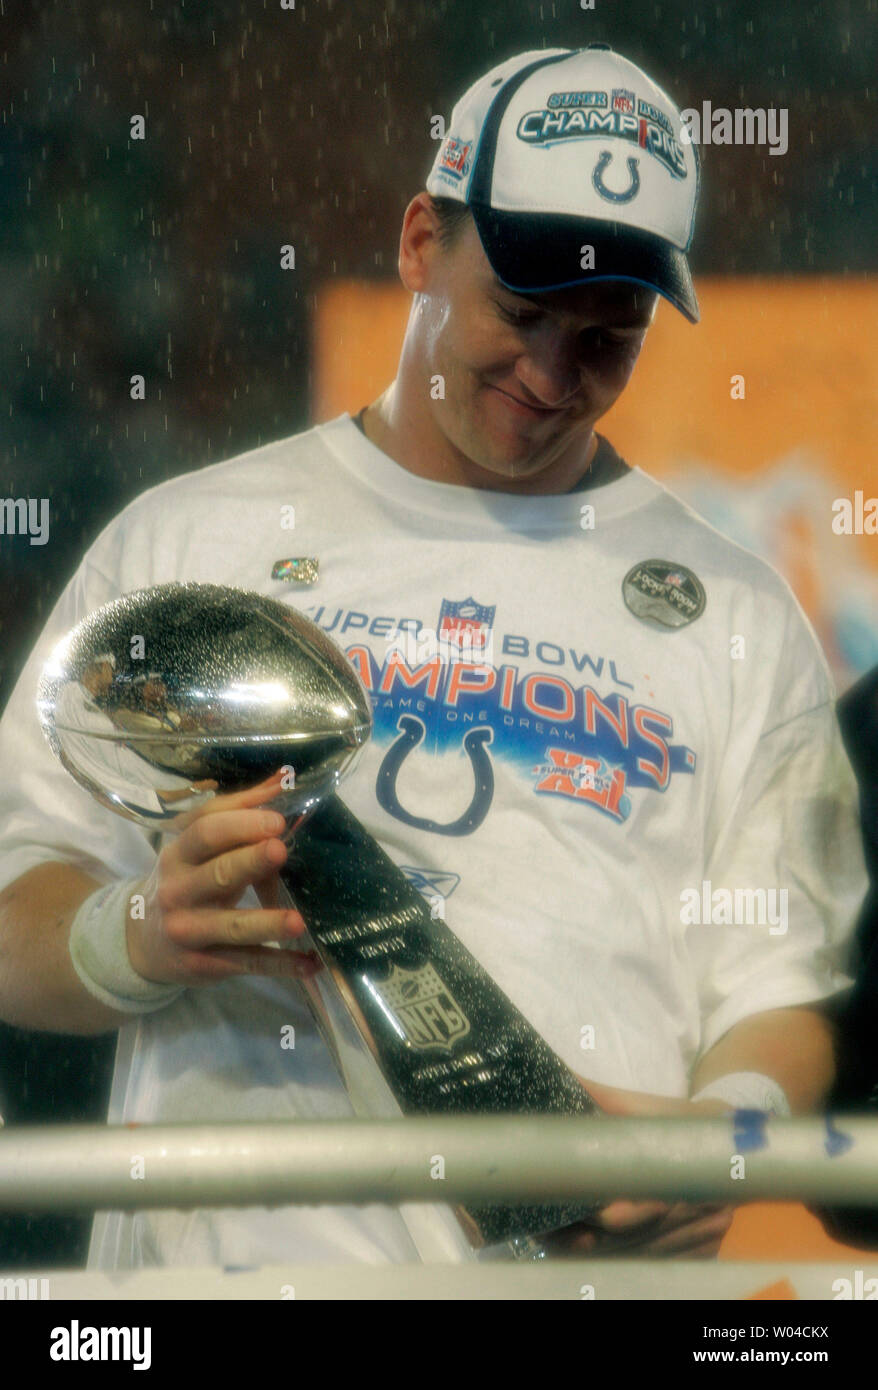 Indianapolis Colts quarterback Peyton Manning, Super Bowl MVP, holds the Lombardy Trophy while celebrating the Super Bowl XLI at Dolphin Stadium in Miami on February 4, 2007. The Colts defeated the Bears 29-17.   (UPI Photo/Gary C. Caskey) Stock Photo